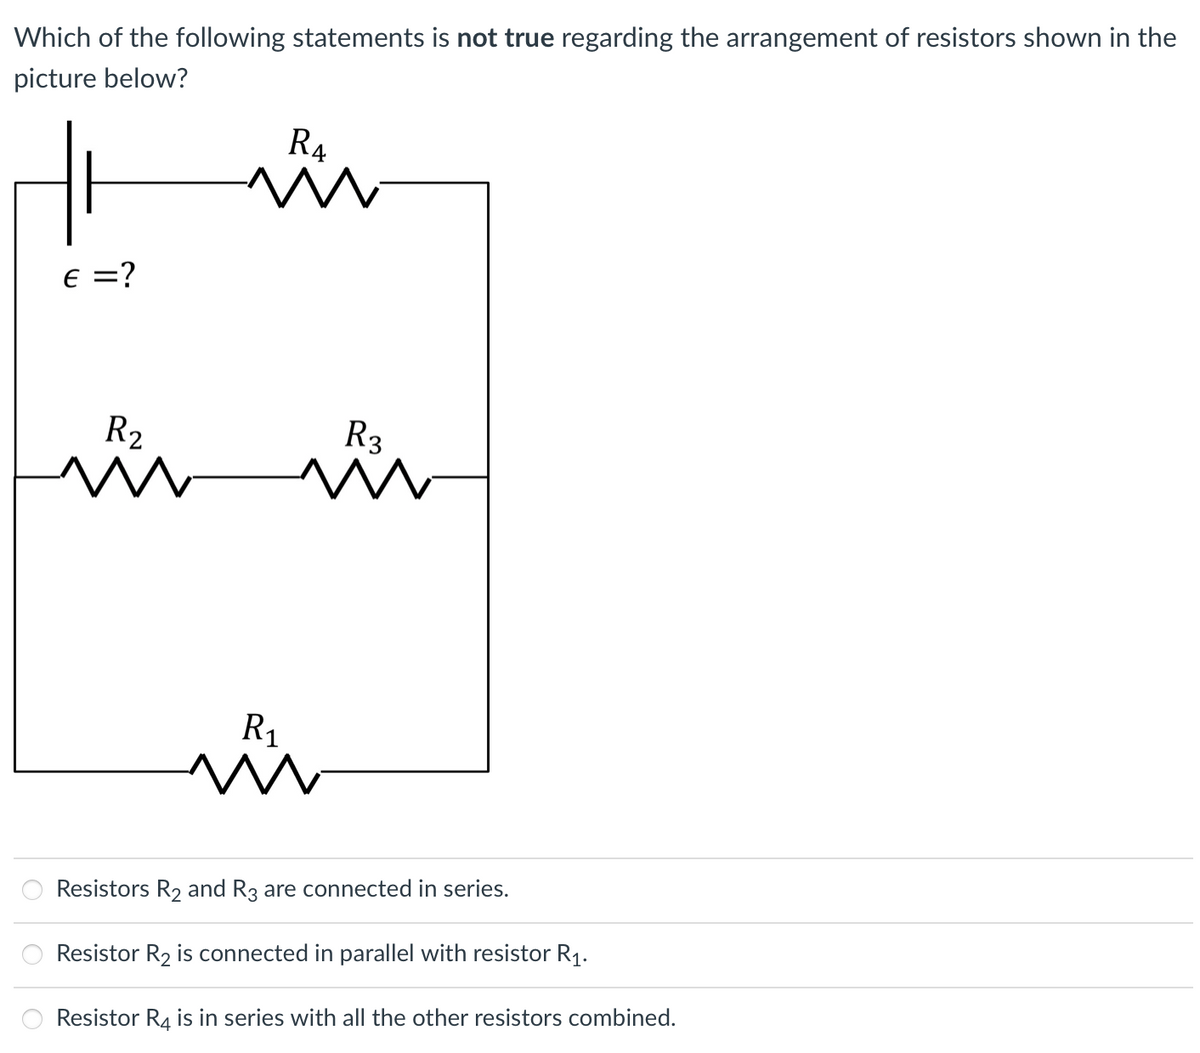 Which of the following statements is not true regarding the arrangement of resistors shown in the
picture below?
R4
E =?
R2
R3
R1
Resistors R2 and R3 are connected in series.
Resistor R2 is connected in parallel with resistor R1.
Resistor R4 is in series with all the other resistors combined.
